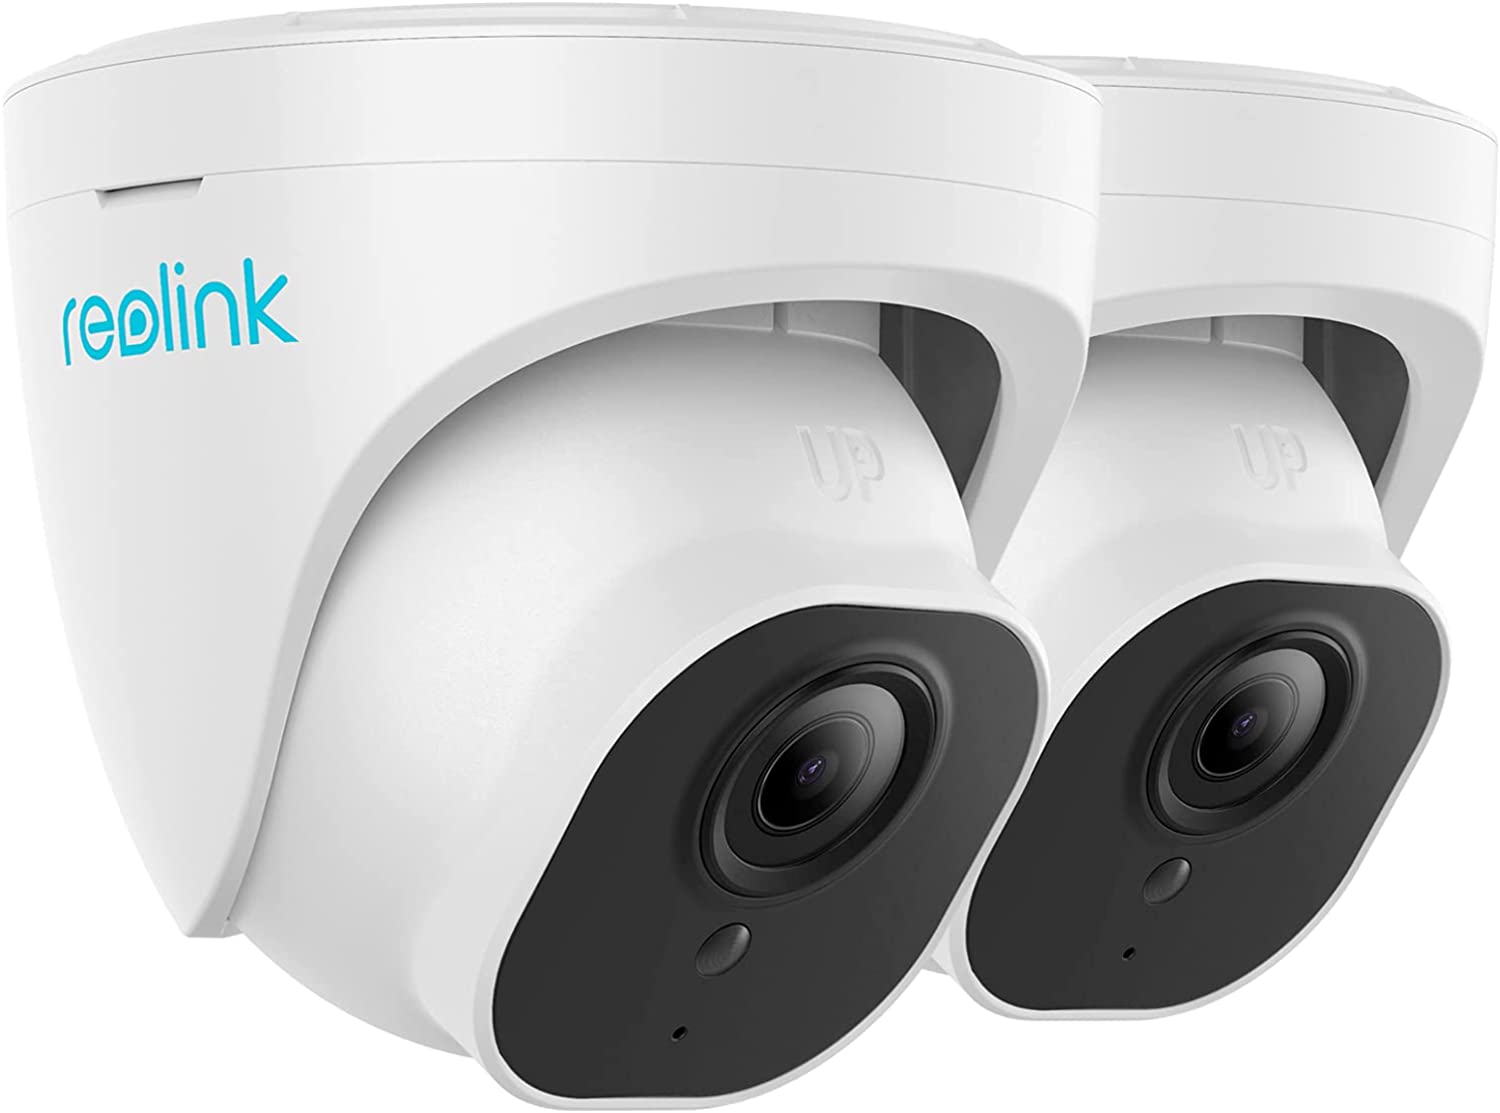 REOLINK PoE IP 5MP(2560x1920 at 30 FPS) Cameras (Pack of 2) Outdoor HD Video Surveillance, 100Ft IR Night Vision, Motion Detection, Work with Smart Home, Up to 128GB Micro SD(not Included), RLC-520